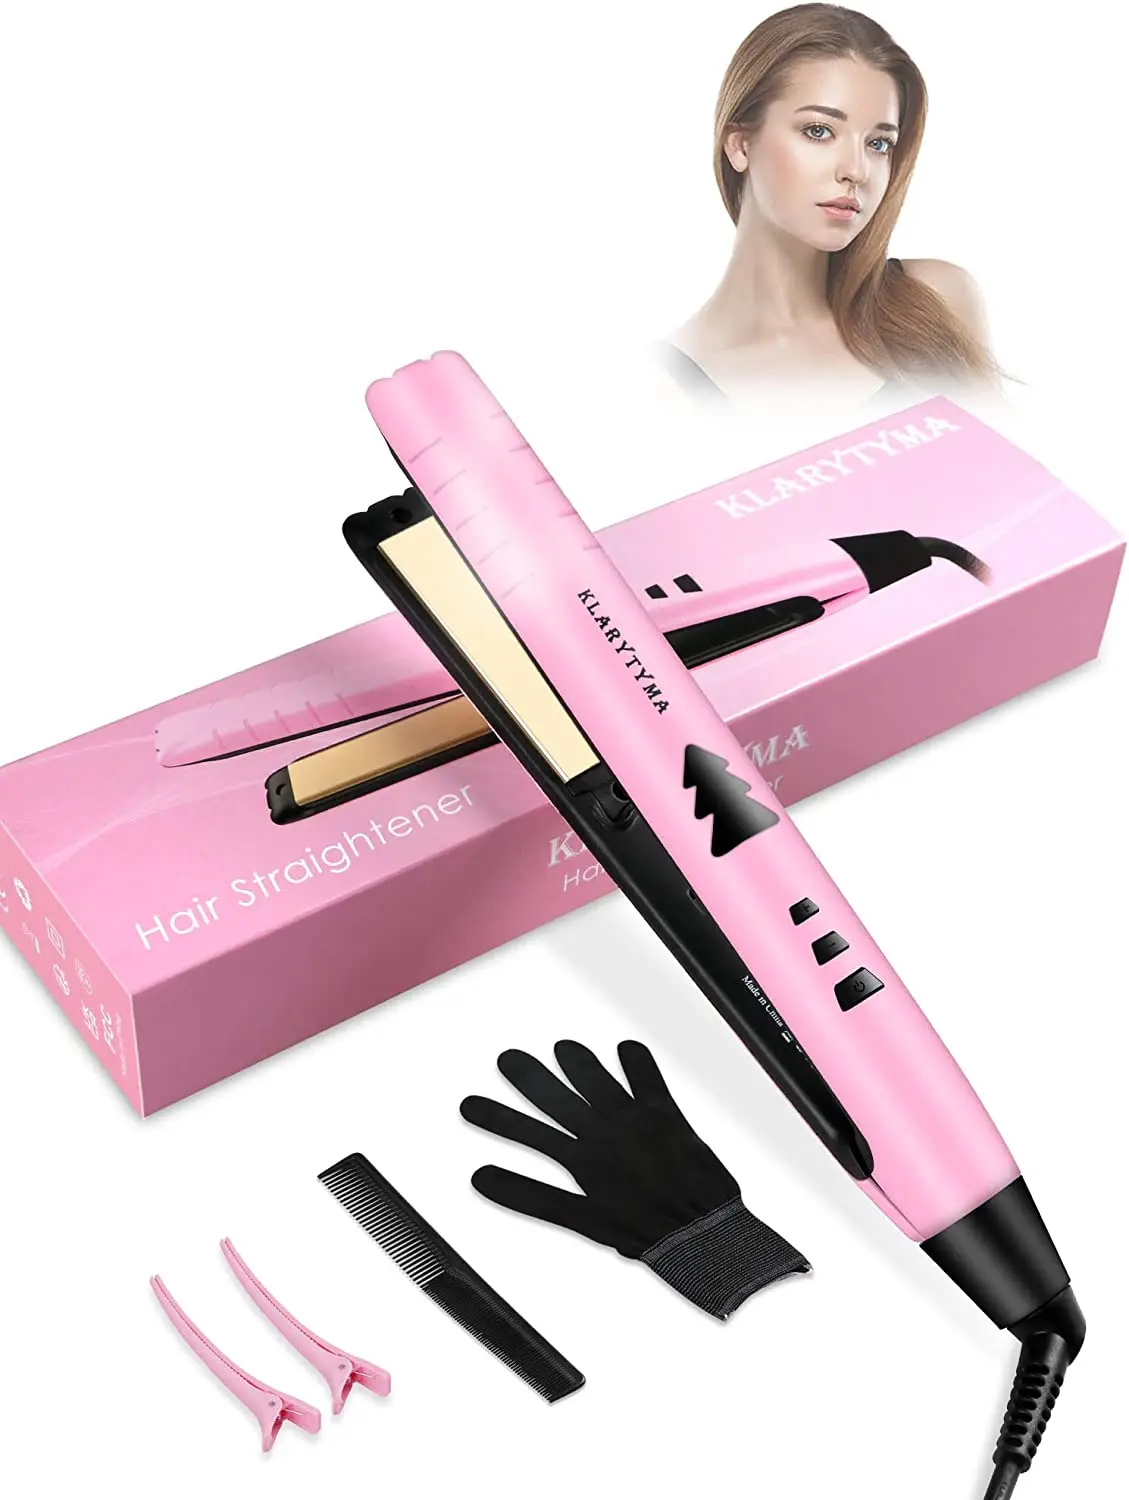 mini-hair-straightener-flat-iron-curler-2-in-1-instant-heat-adjustable-temperature-suitable-for-all-hair-types